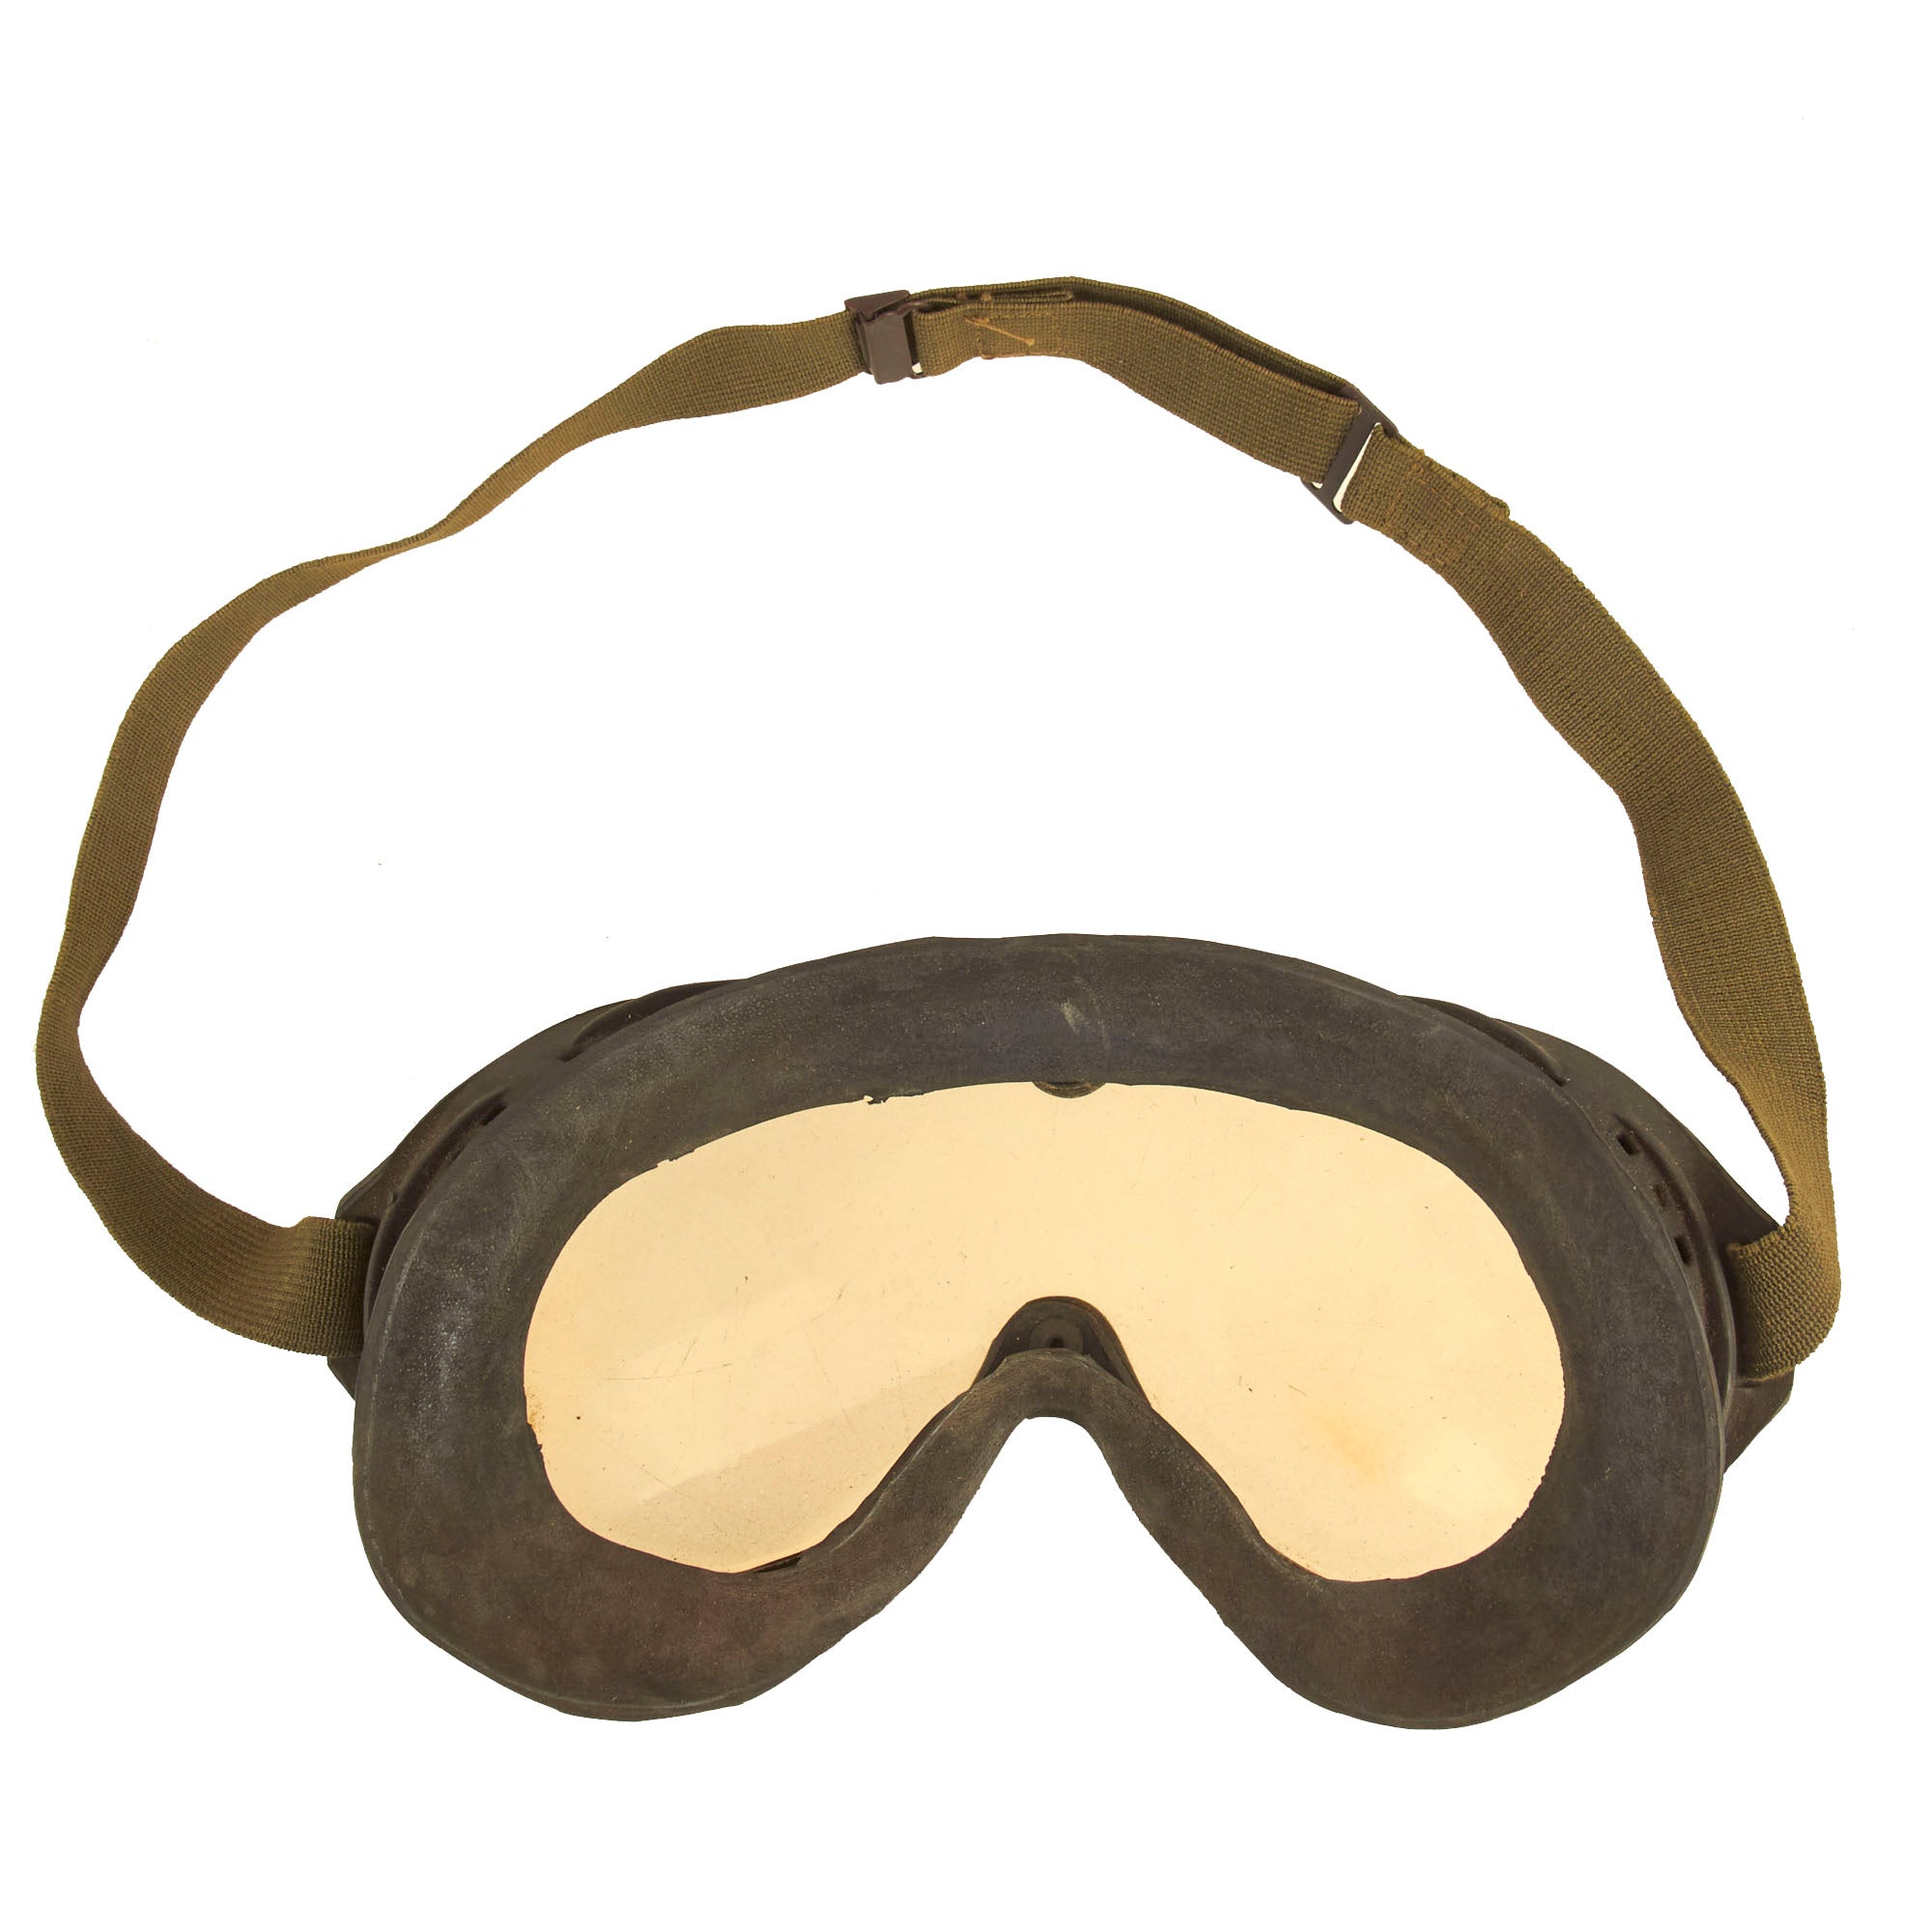 Original U.S. WWII M38 Tanker Helmet by Rawlings with Goggles - Size 6 ...